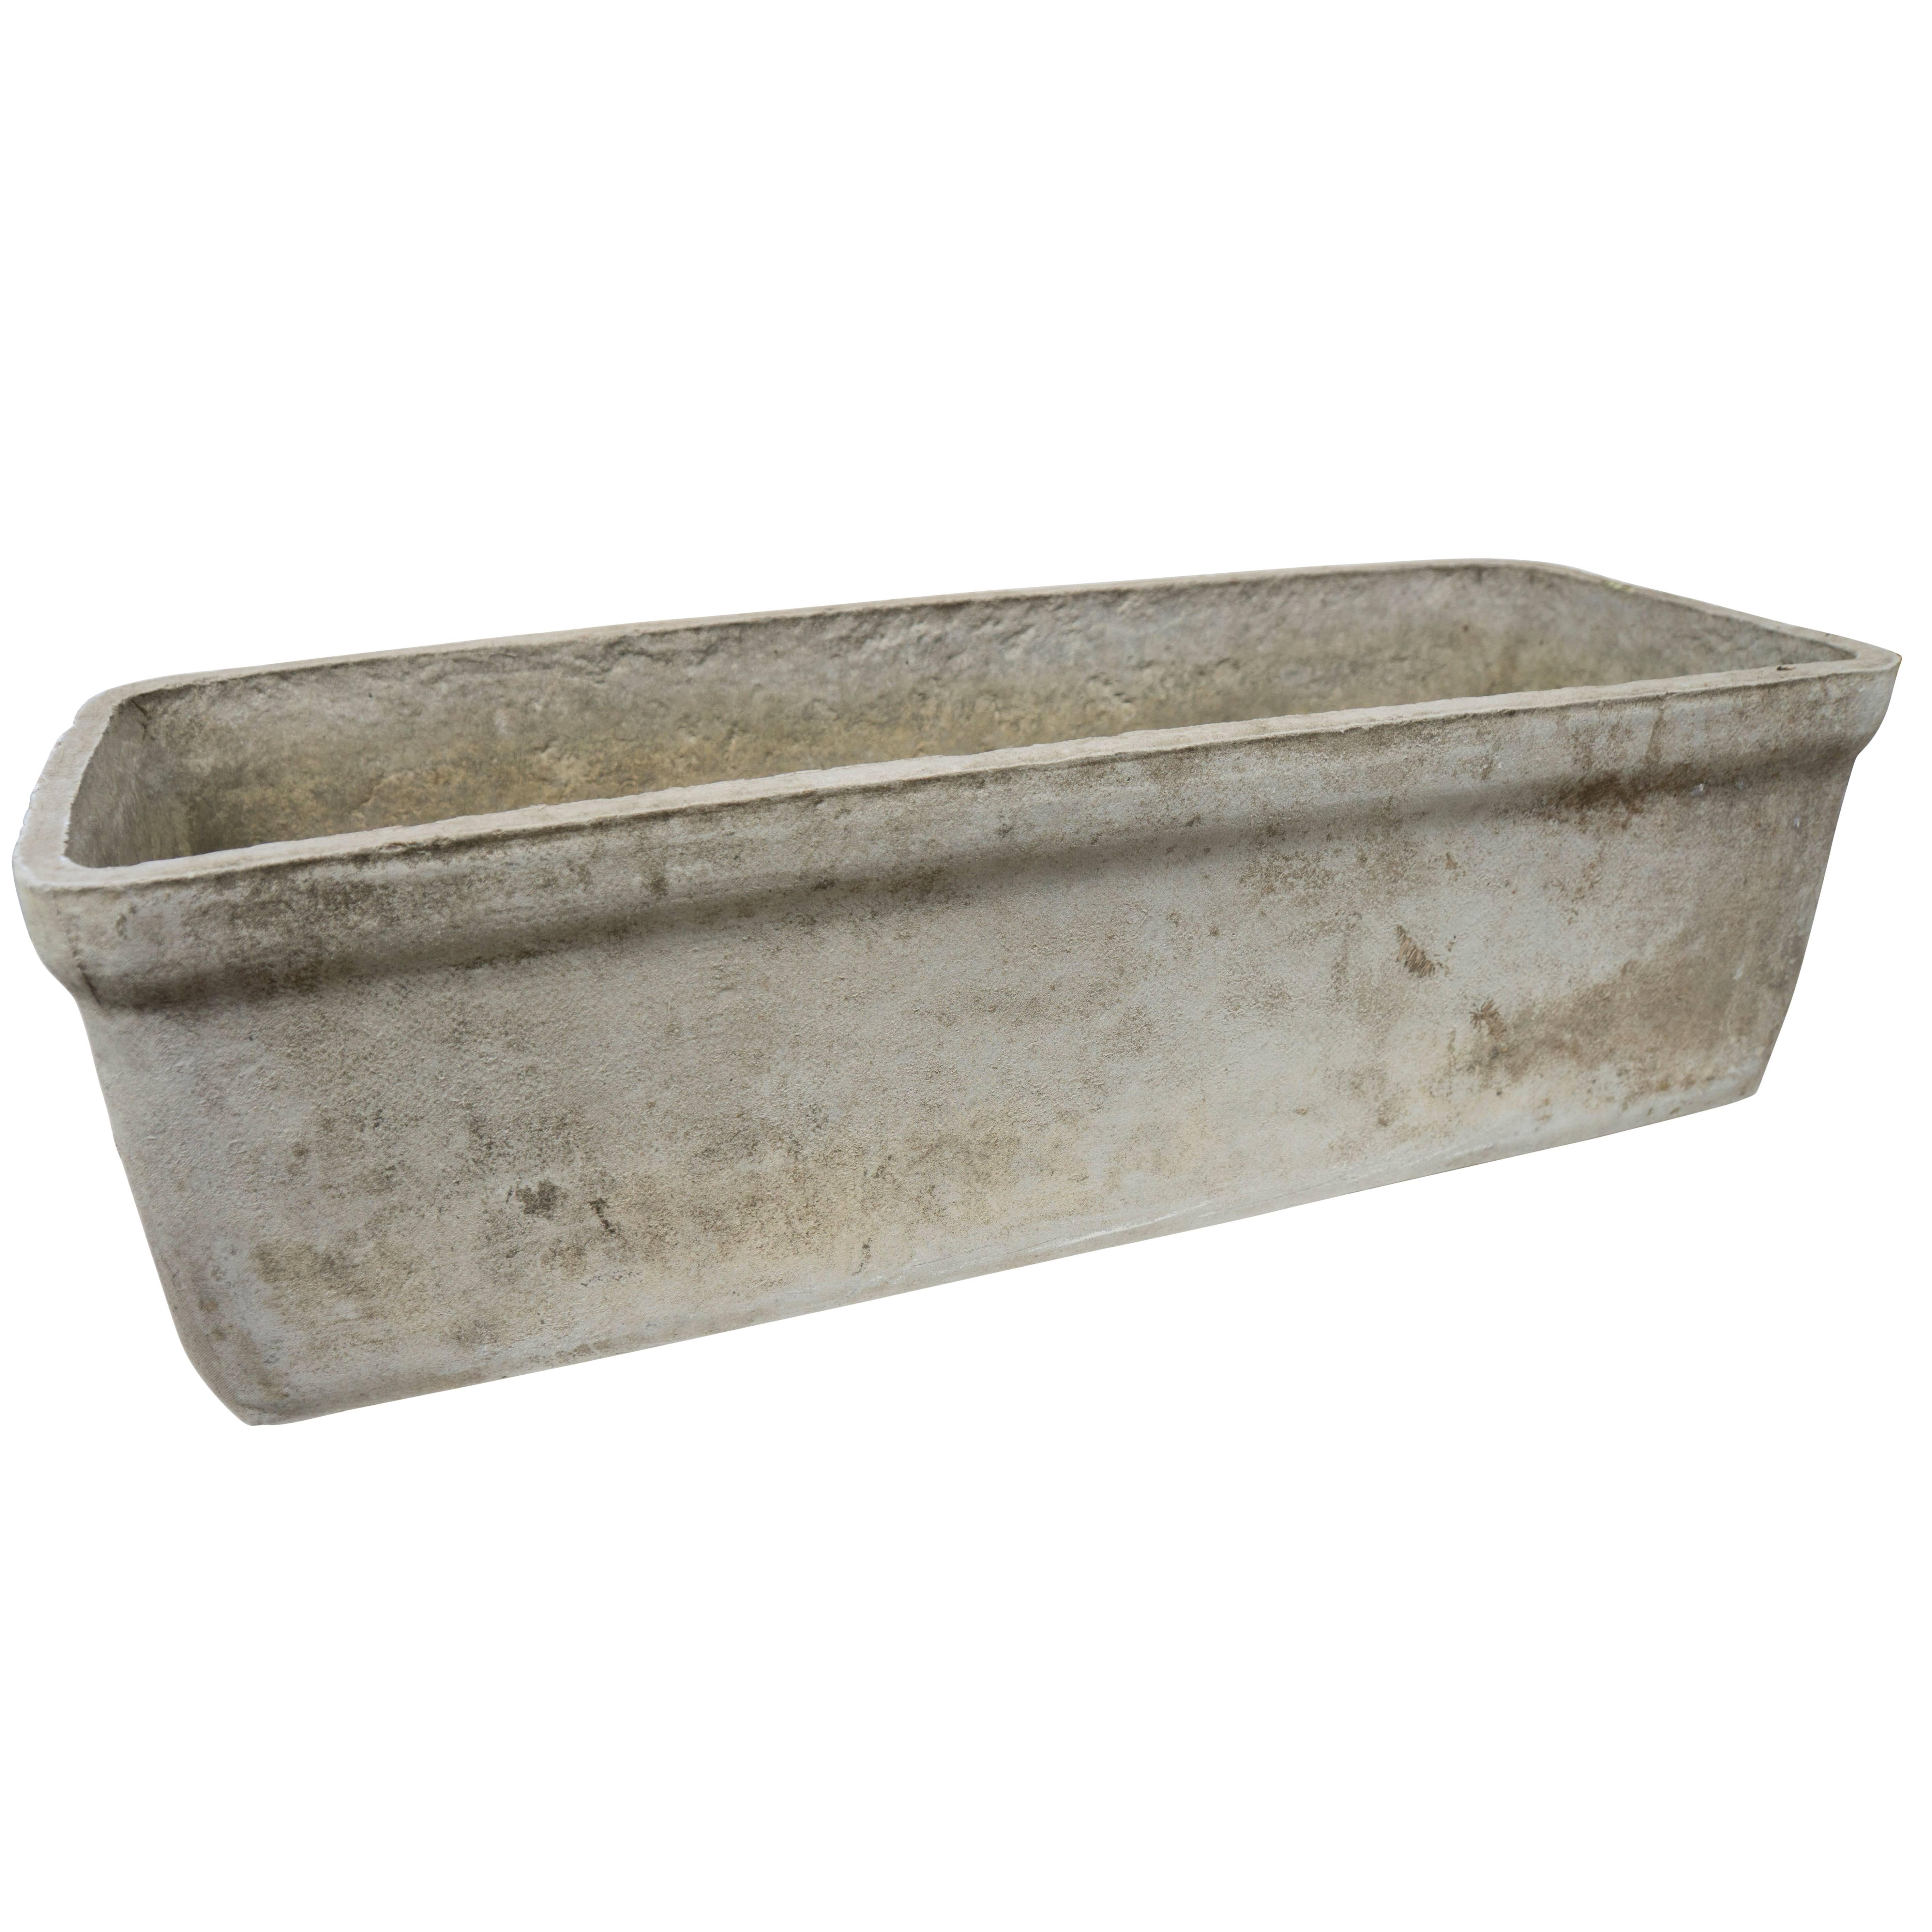 The French cement trough has a way of bridging the area between a floral arrangement and a setting that looks natural and chic. The washed out grey color is a natural patina that comes with age and use. A smooth blend tones ranging between greys and